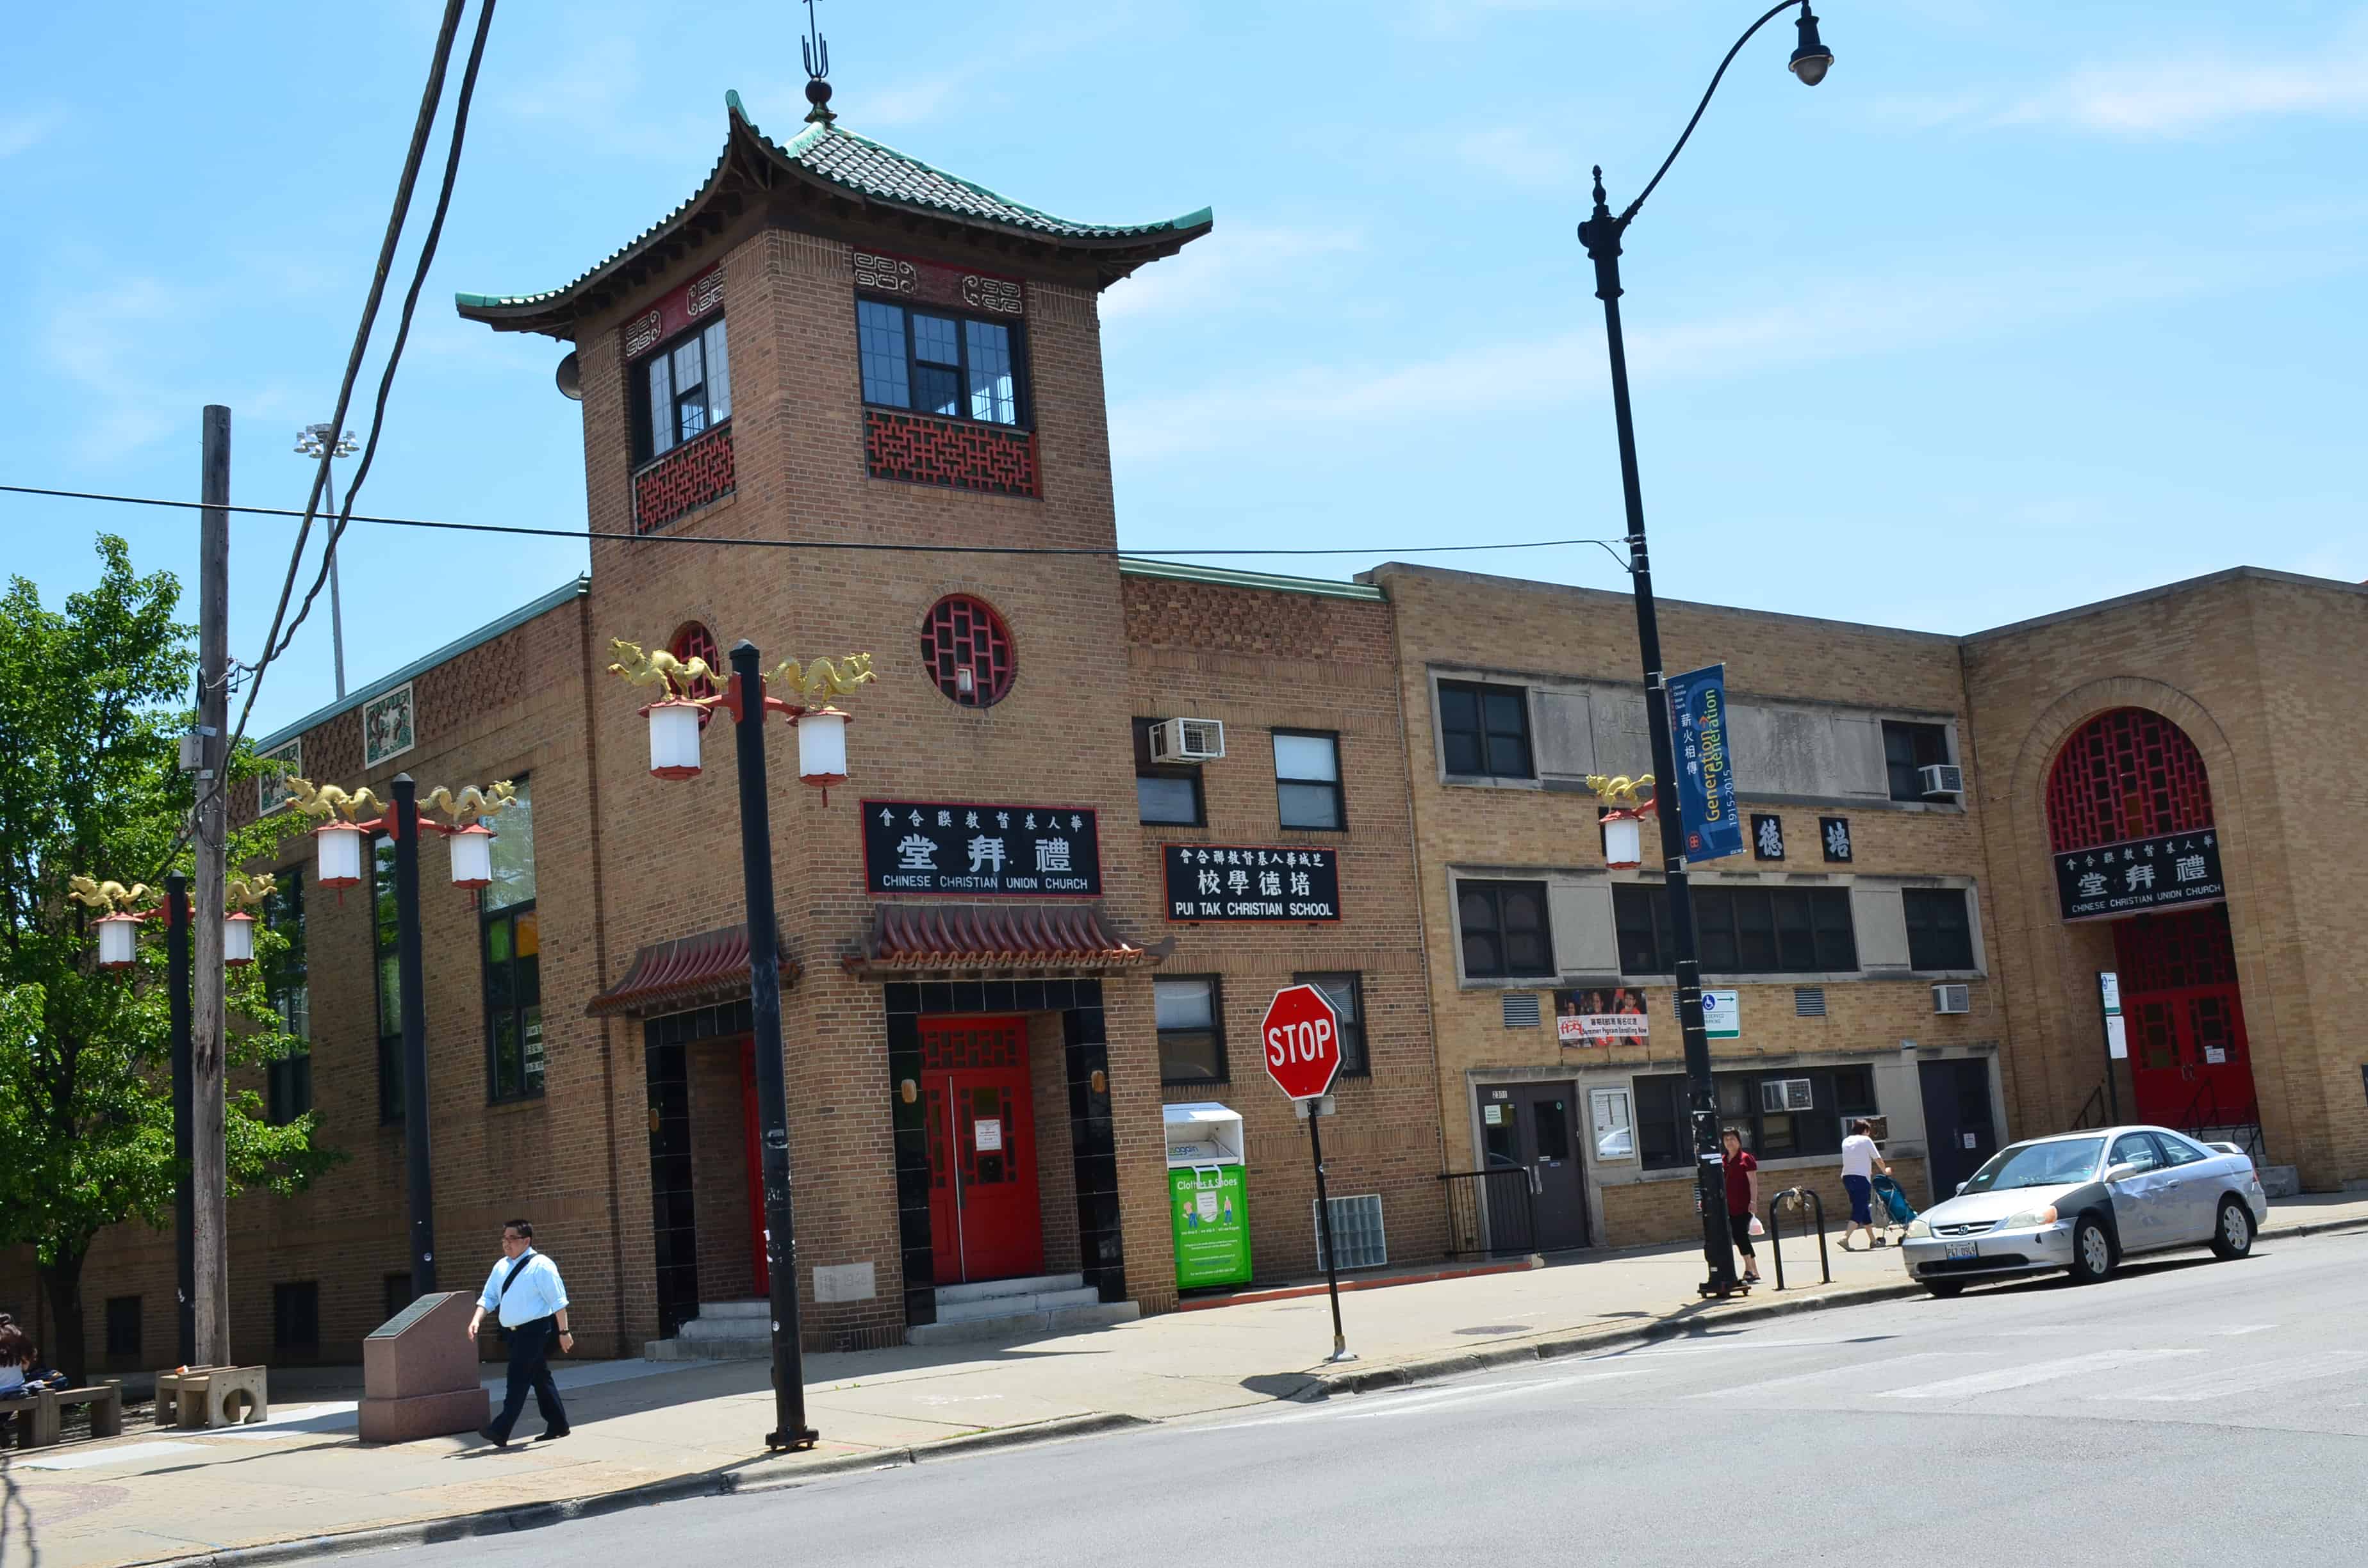 Chinese Christian Union Church in Chinatown, Chicago, Illinois